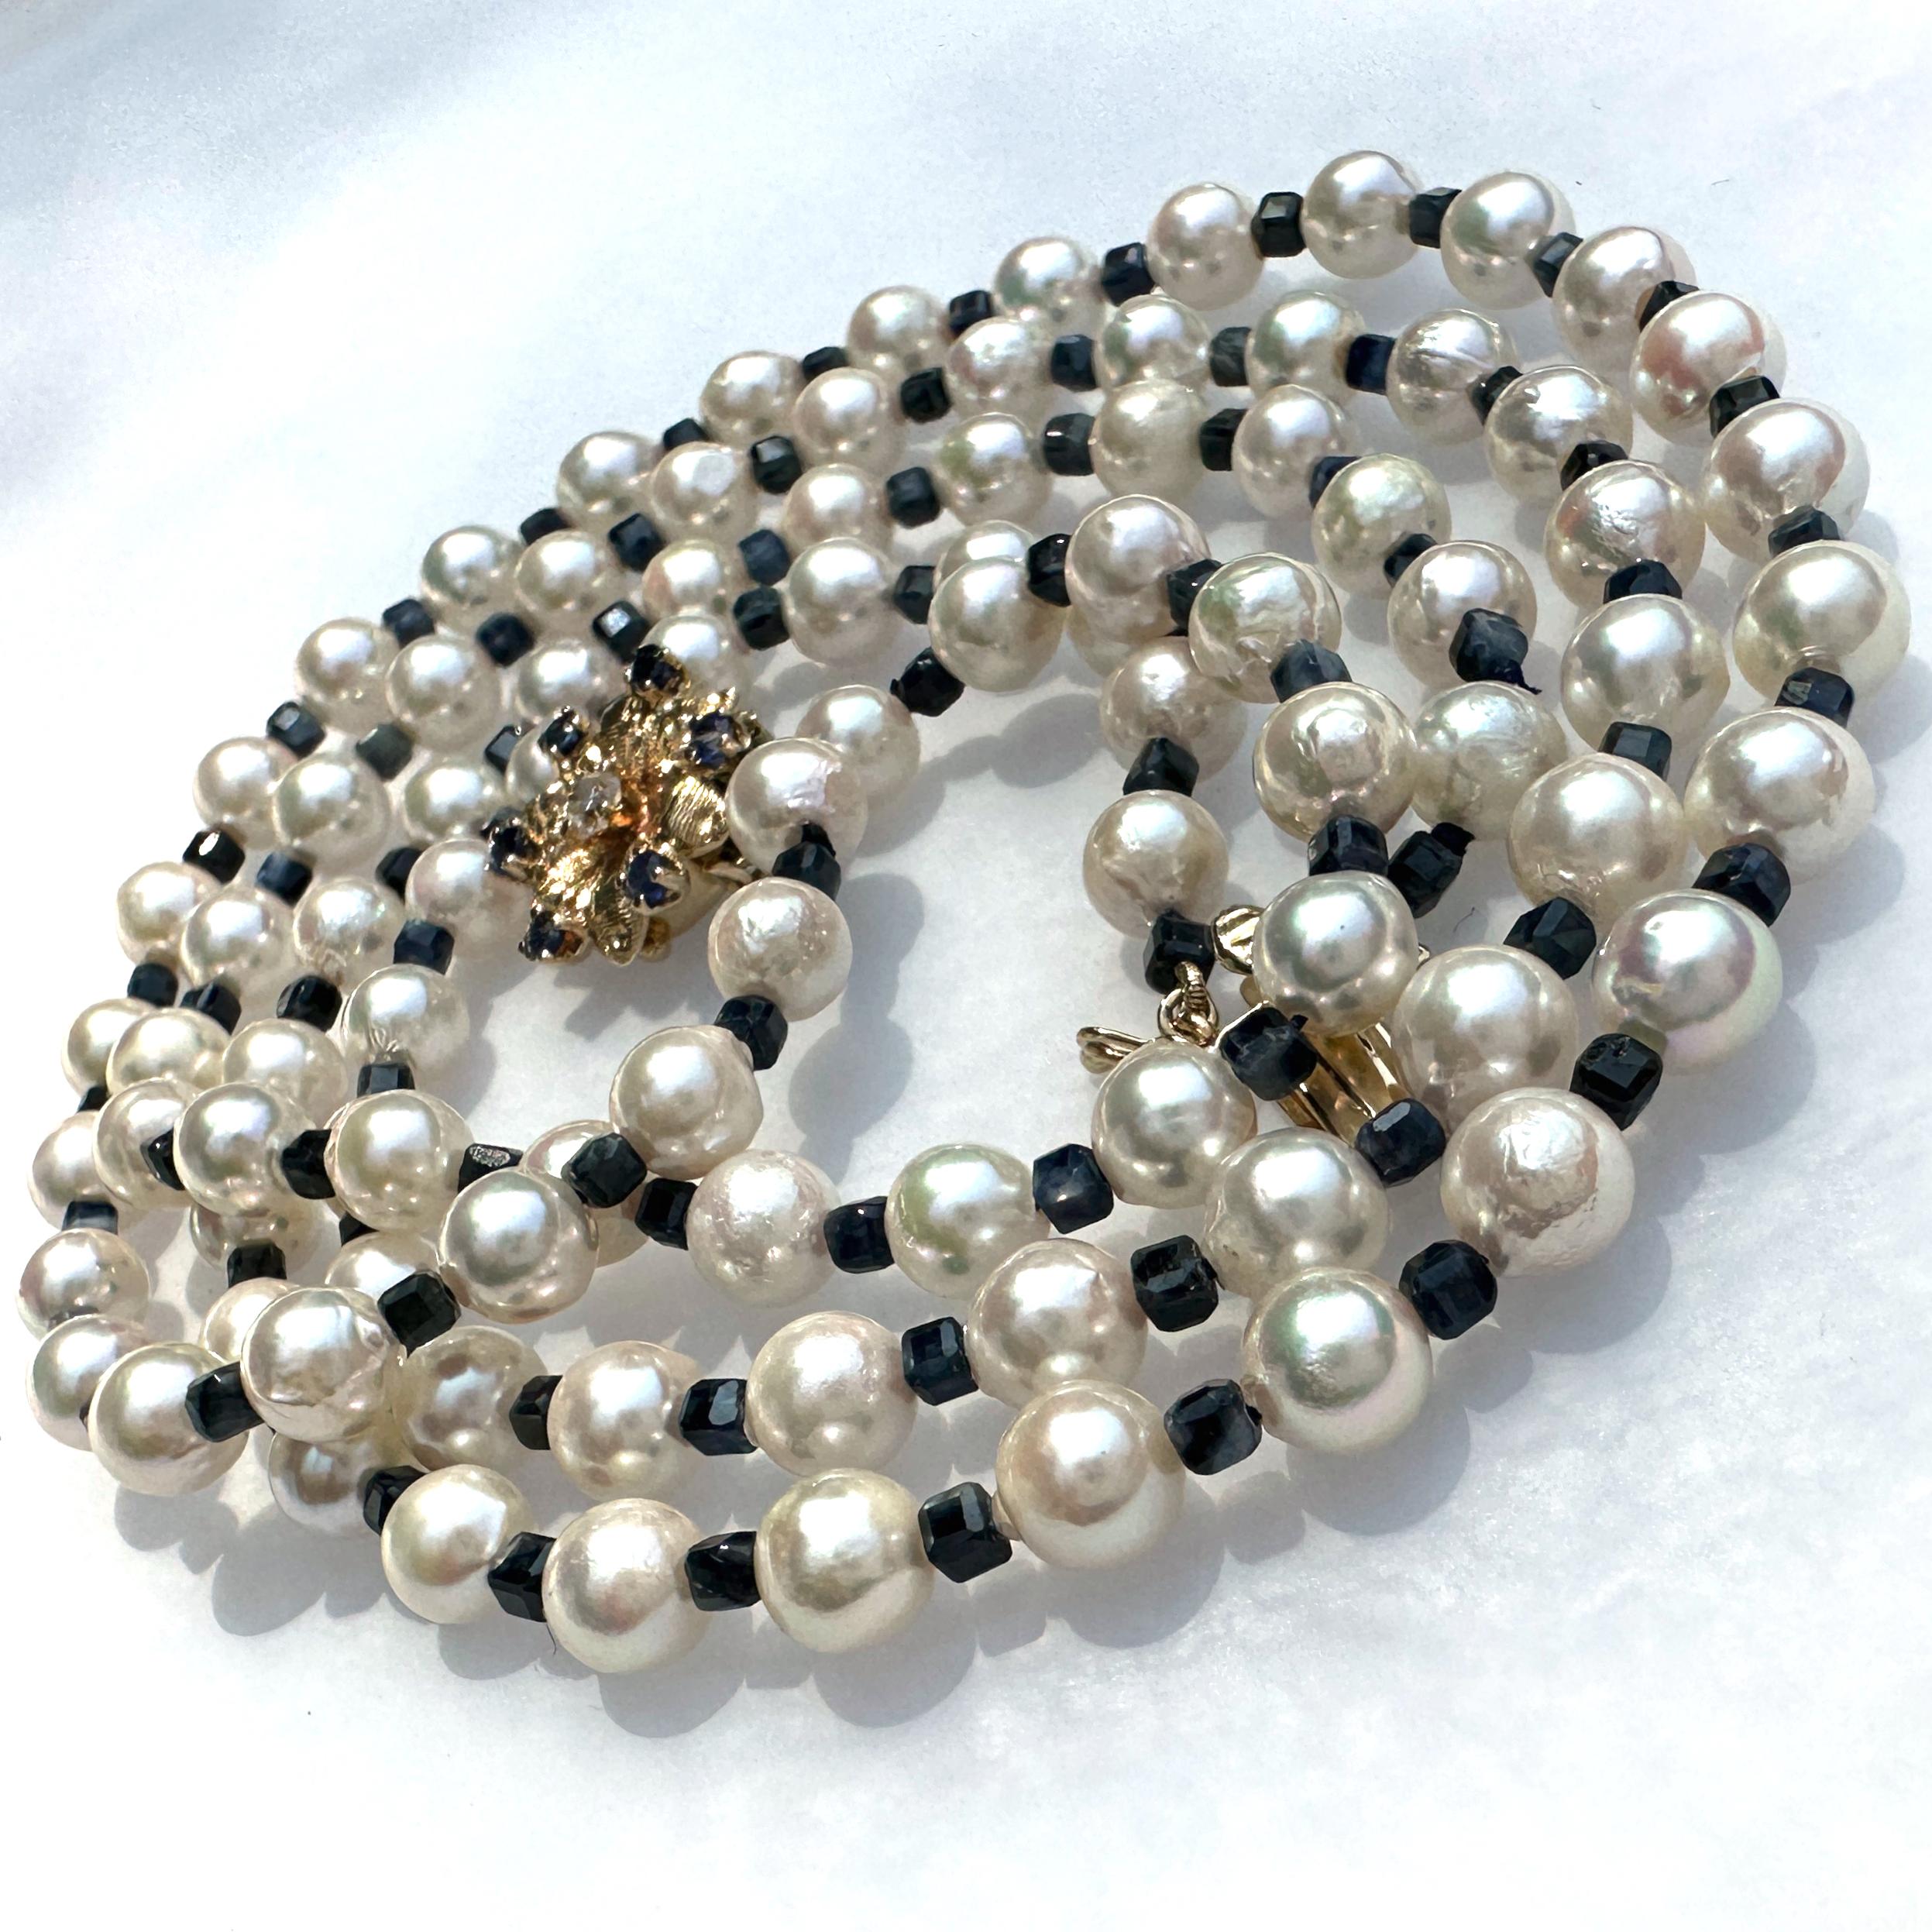 Two-Strand Akoya Pearl Choker Necklace with Sapphire Spacers & 14K Diamond Clasp In Excellent Condition For Sale In Sherman Oaks, CA